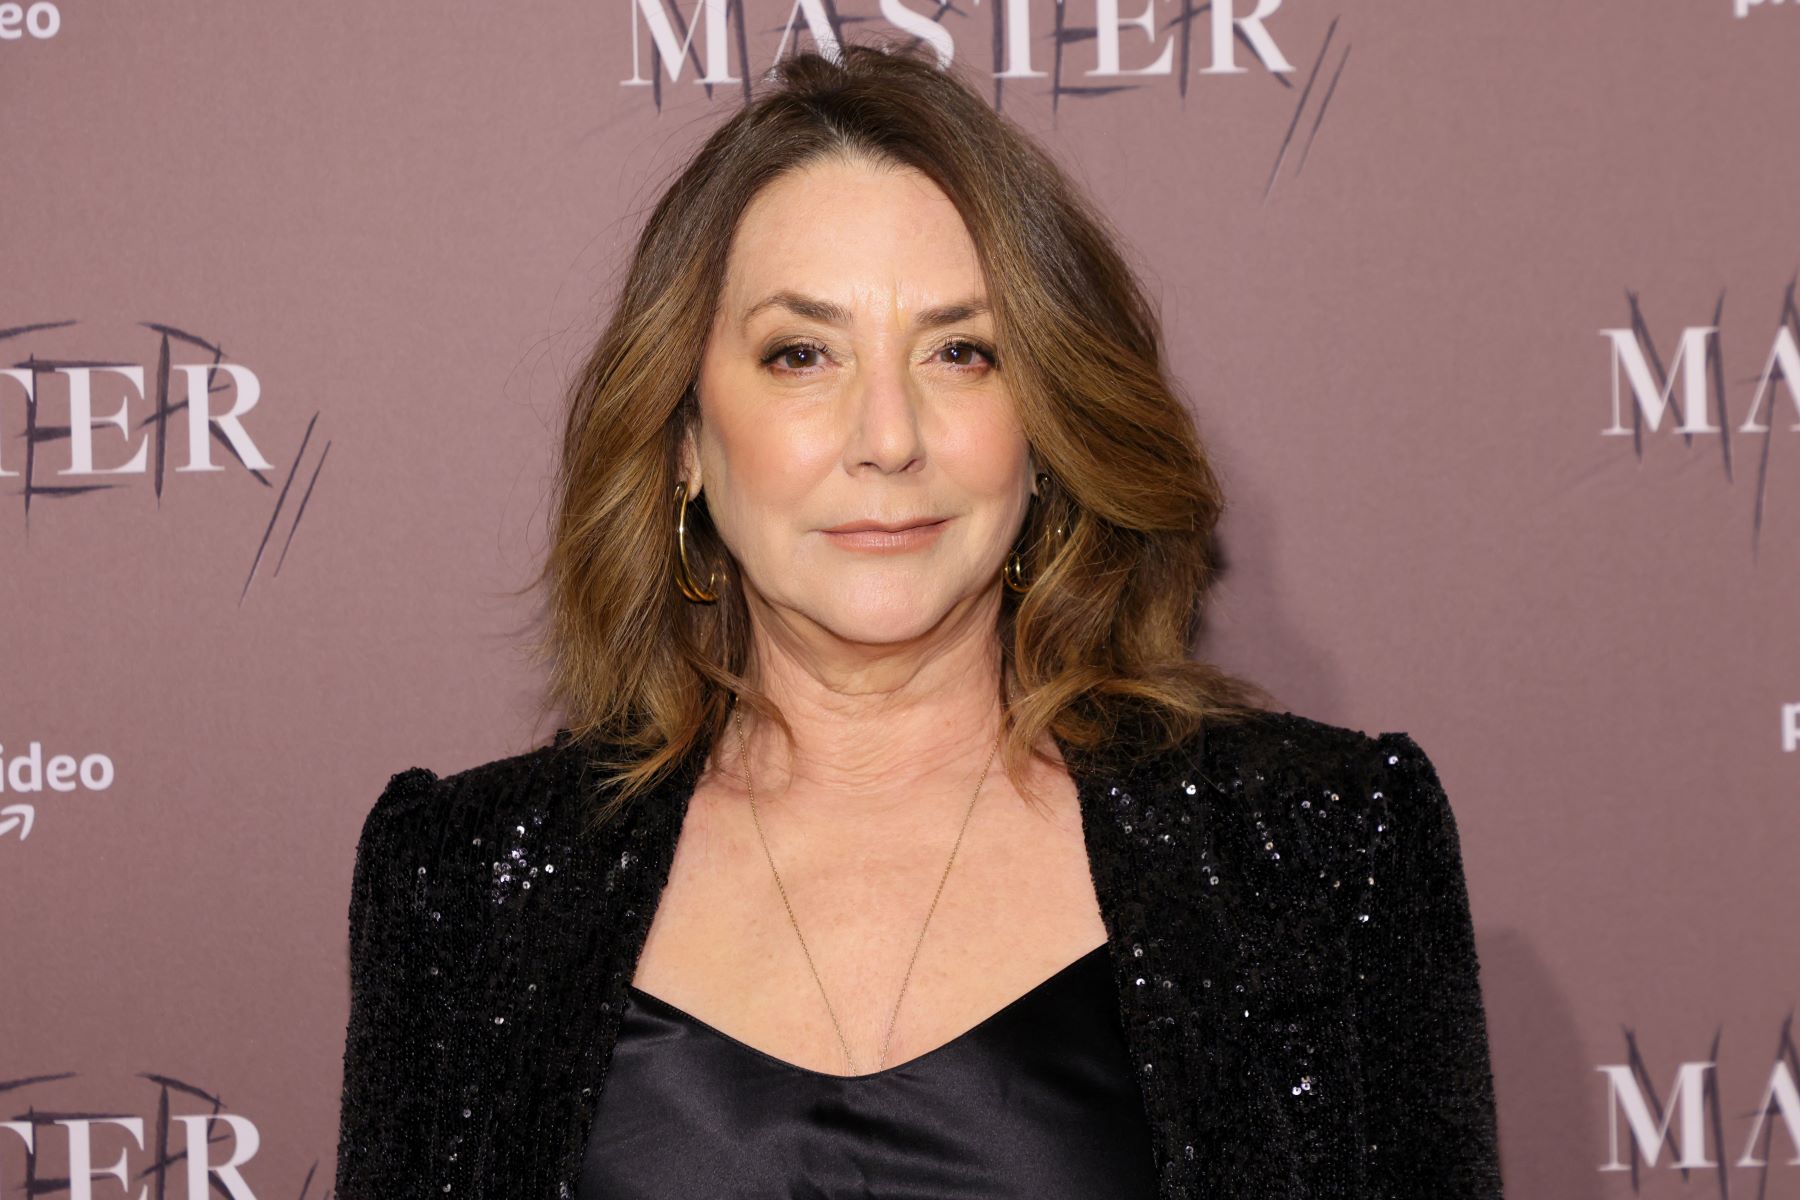 George Clooney's ex-wife Talia Balsam at Amazon's 'Master' premiere at Metrograph in New York City